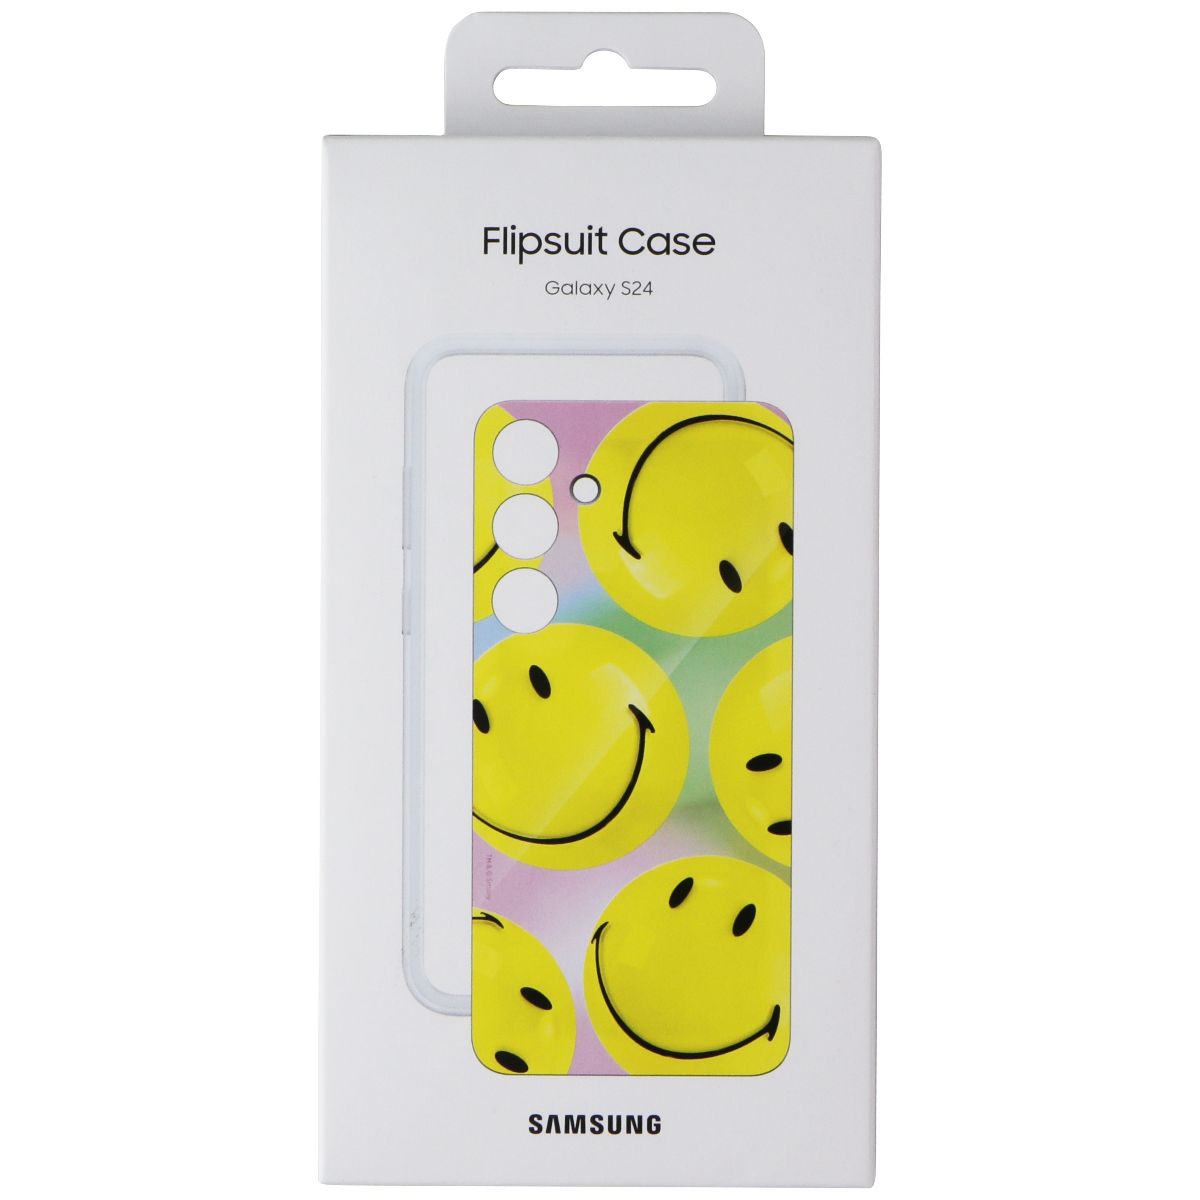 Samsung Official Flipsuit Case for Samsung Galaxy S24 - Yellow